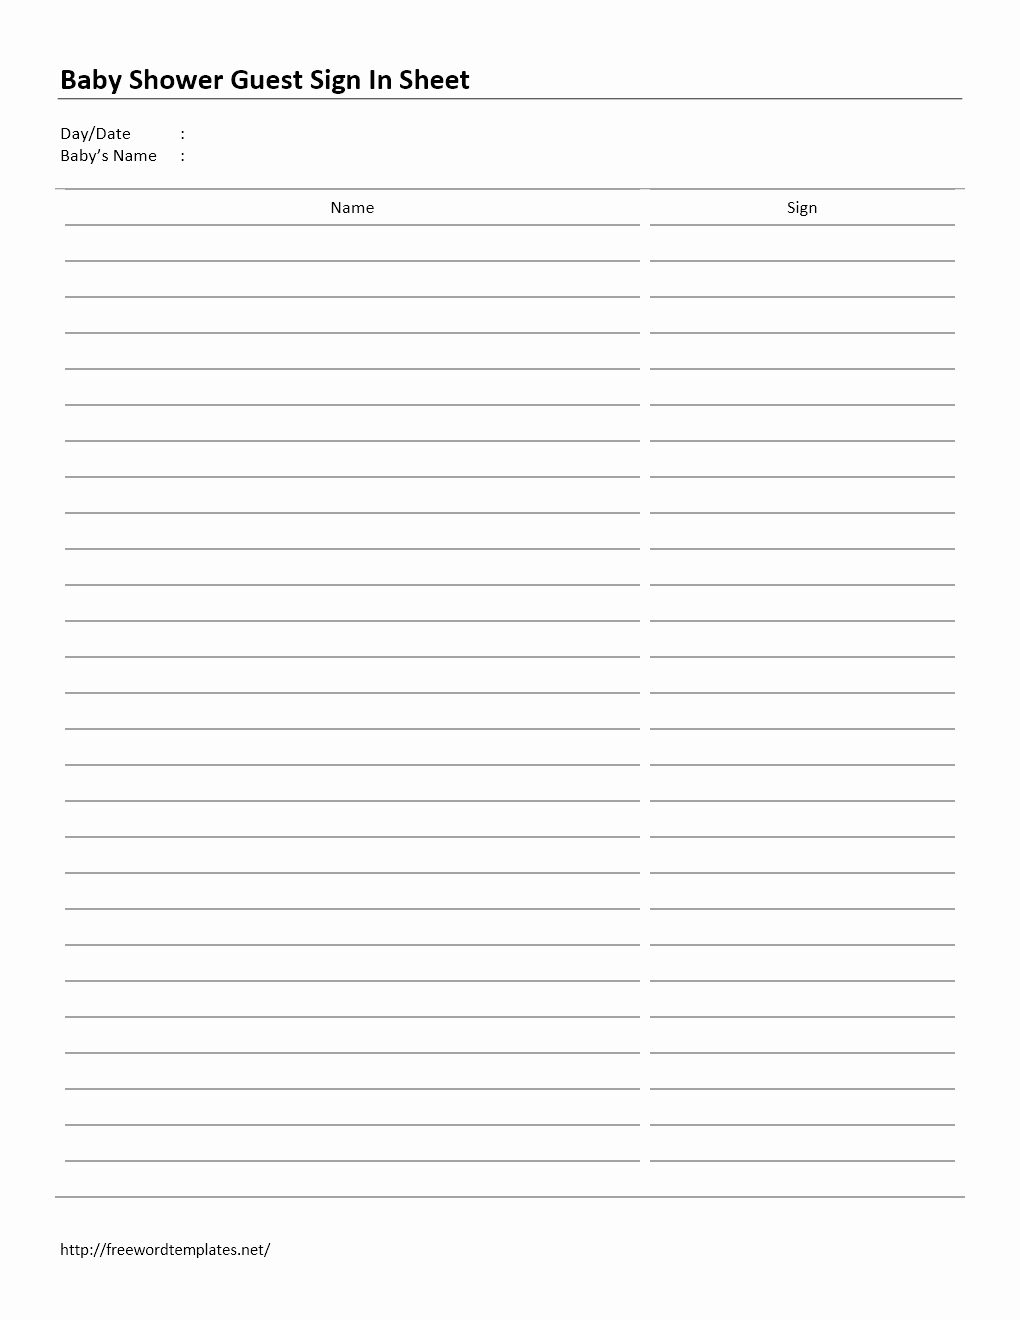 Guest Sign In Sheet Templates New Baby Shower Guest Sign In Sheet